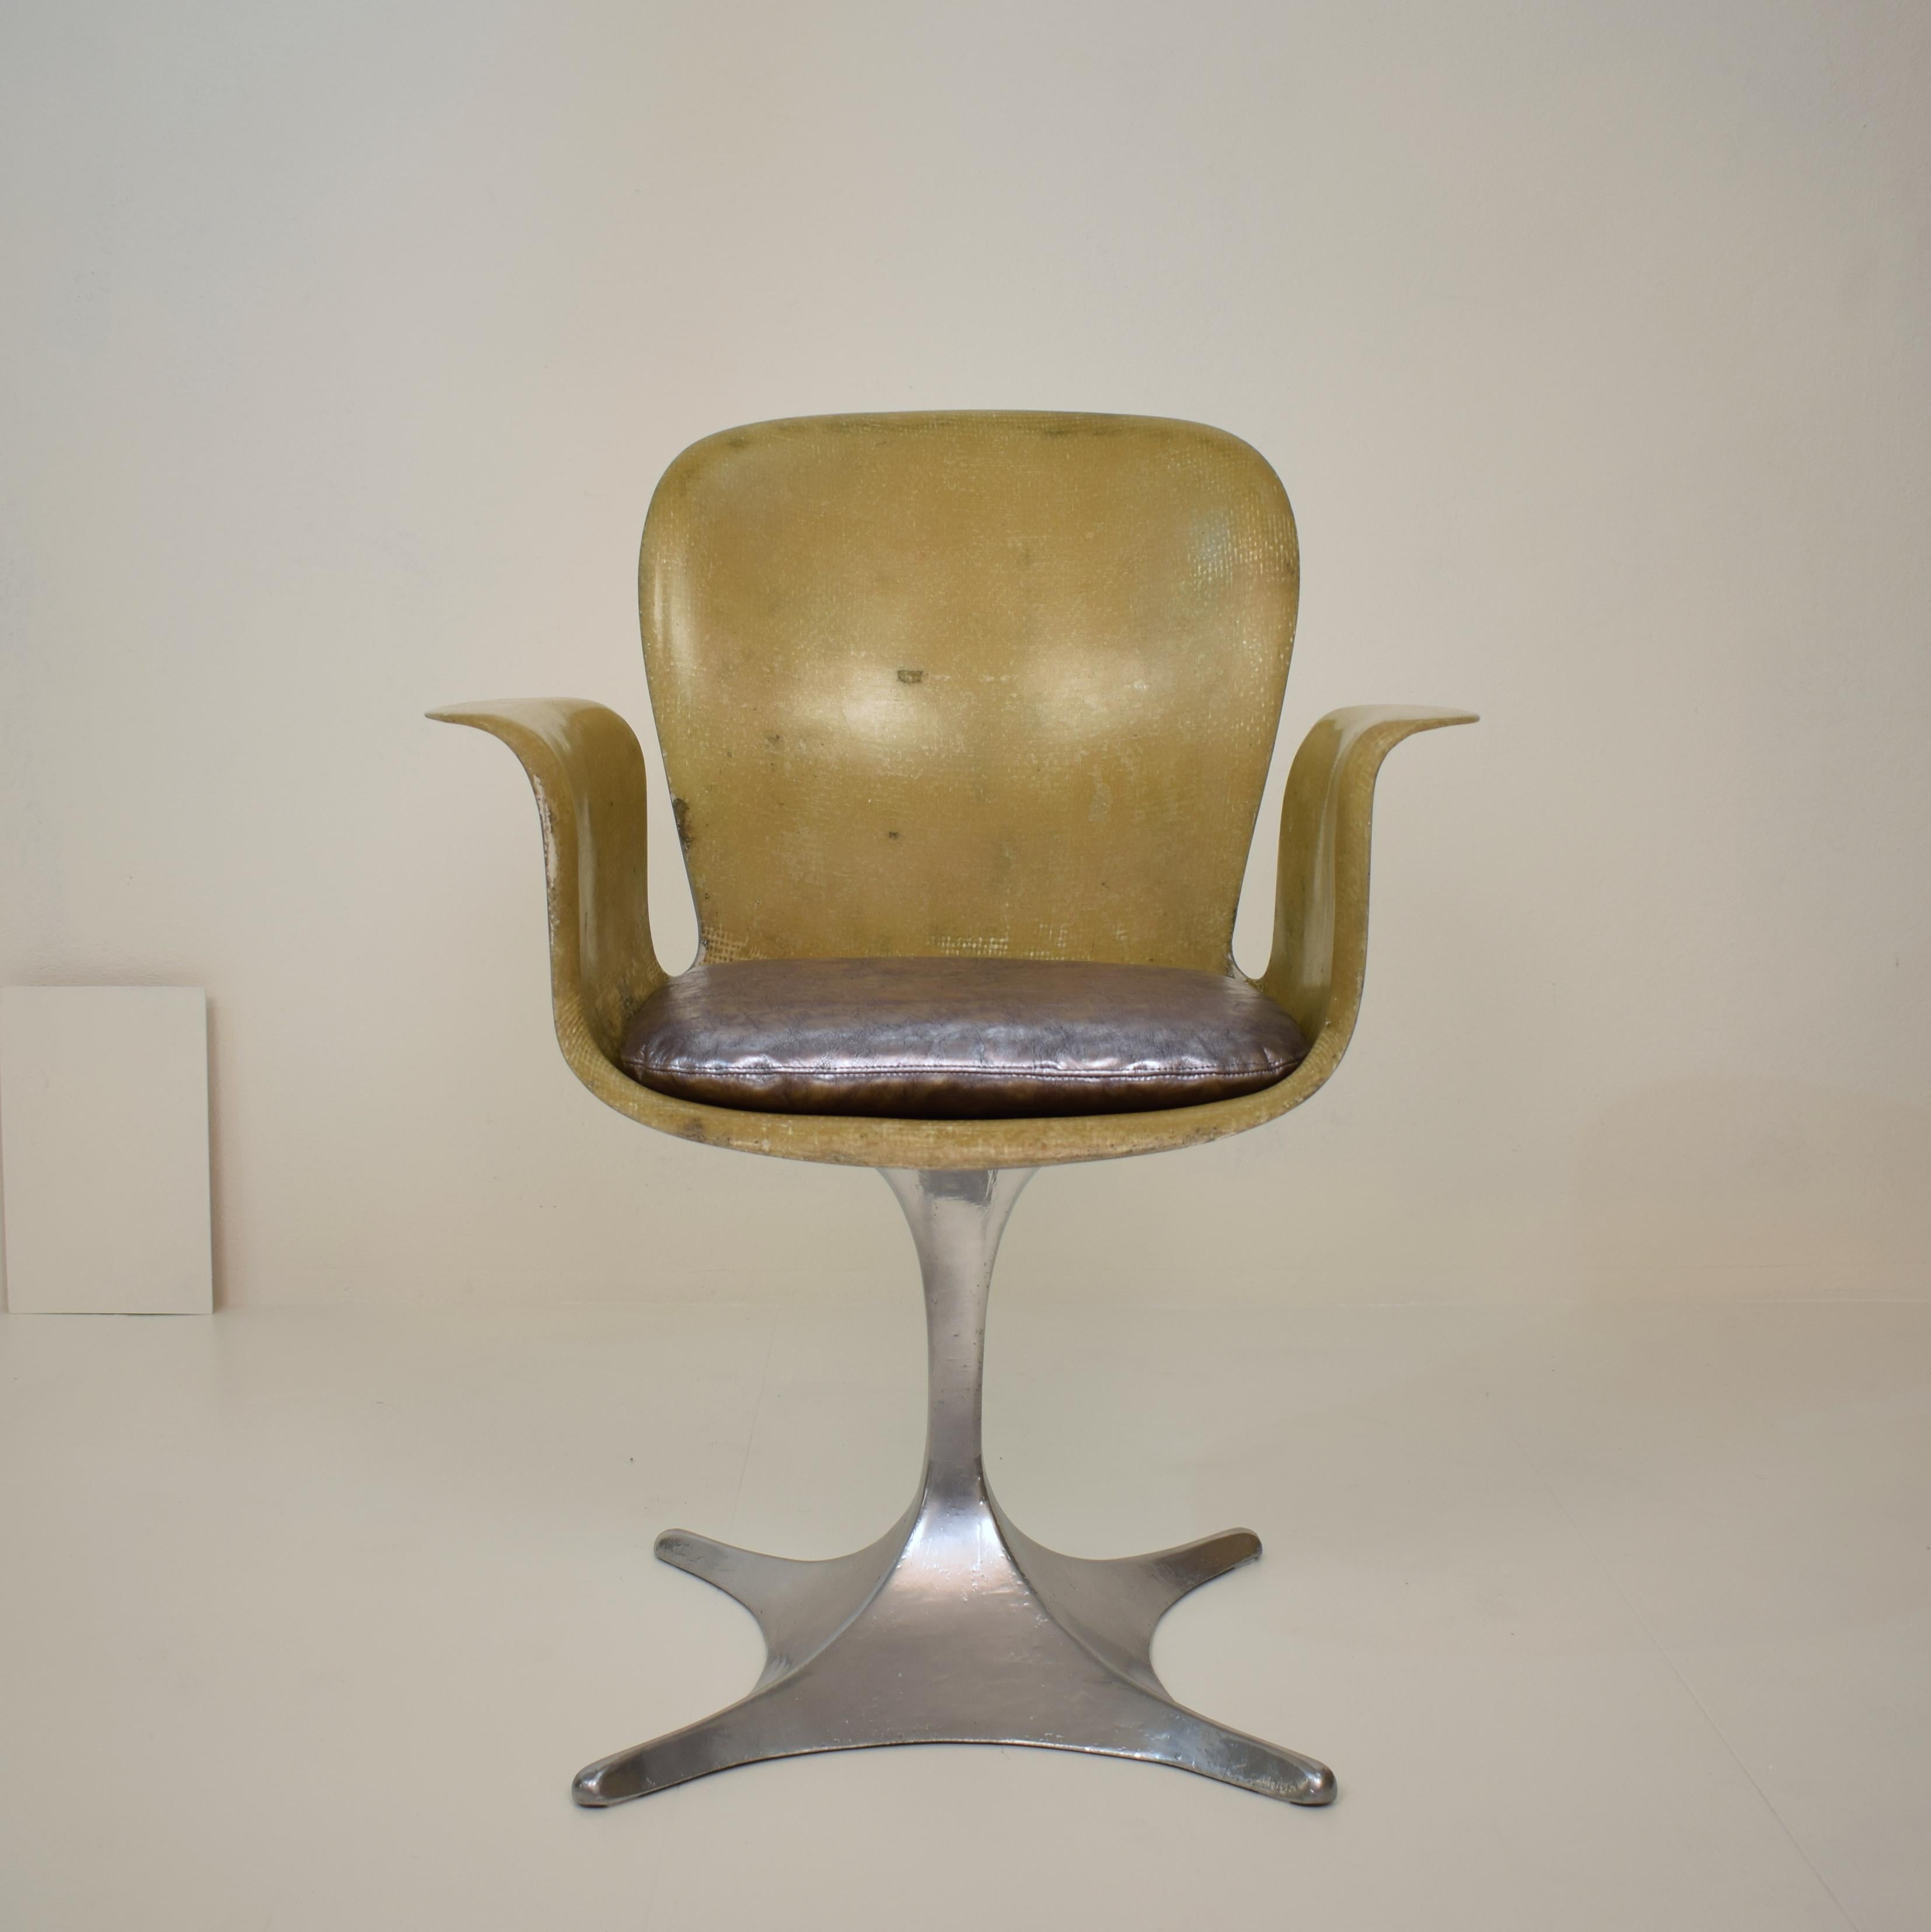 This beautiful and rare midcentury German sculptural fiberglass armchair was made, circa 1957.
It is a prototype and one of a kind.
The chair is handmade and the outside and the base is lacquered in silver. The leather cushion was re-placed.
A